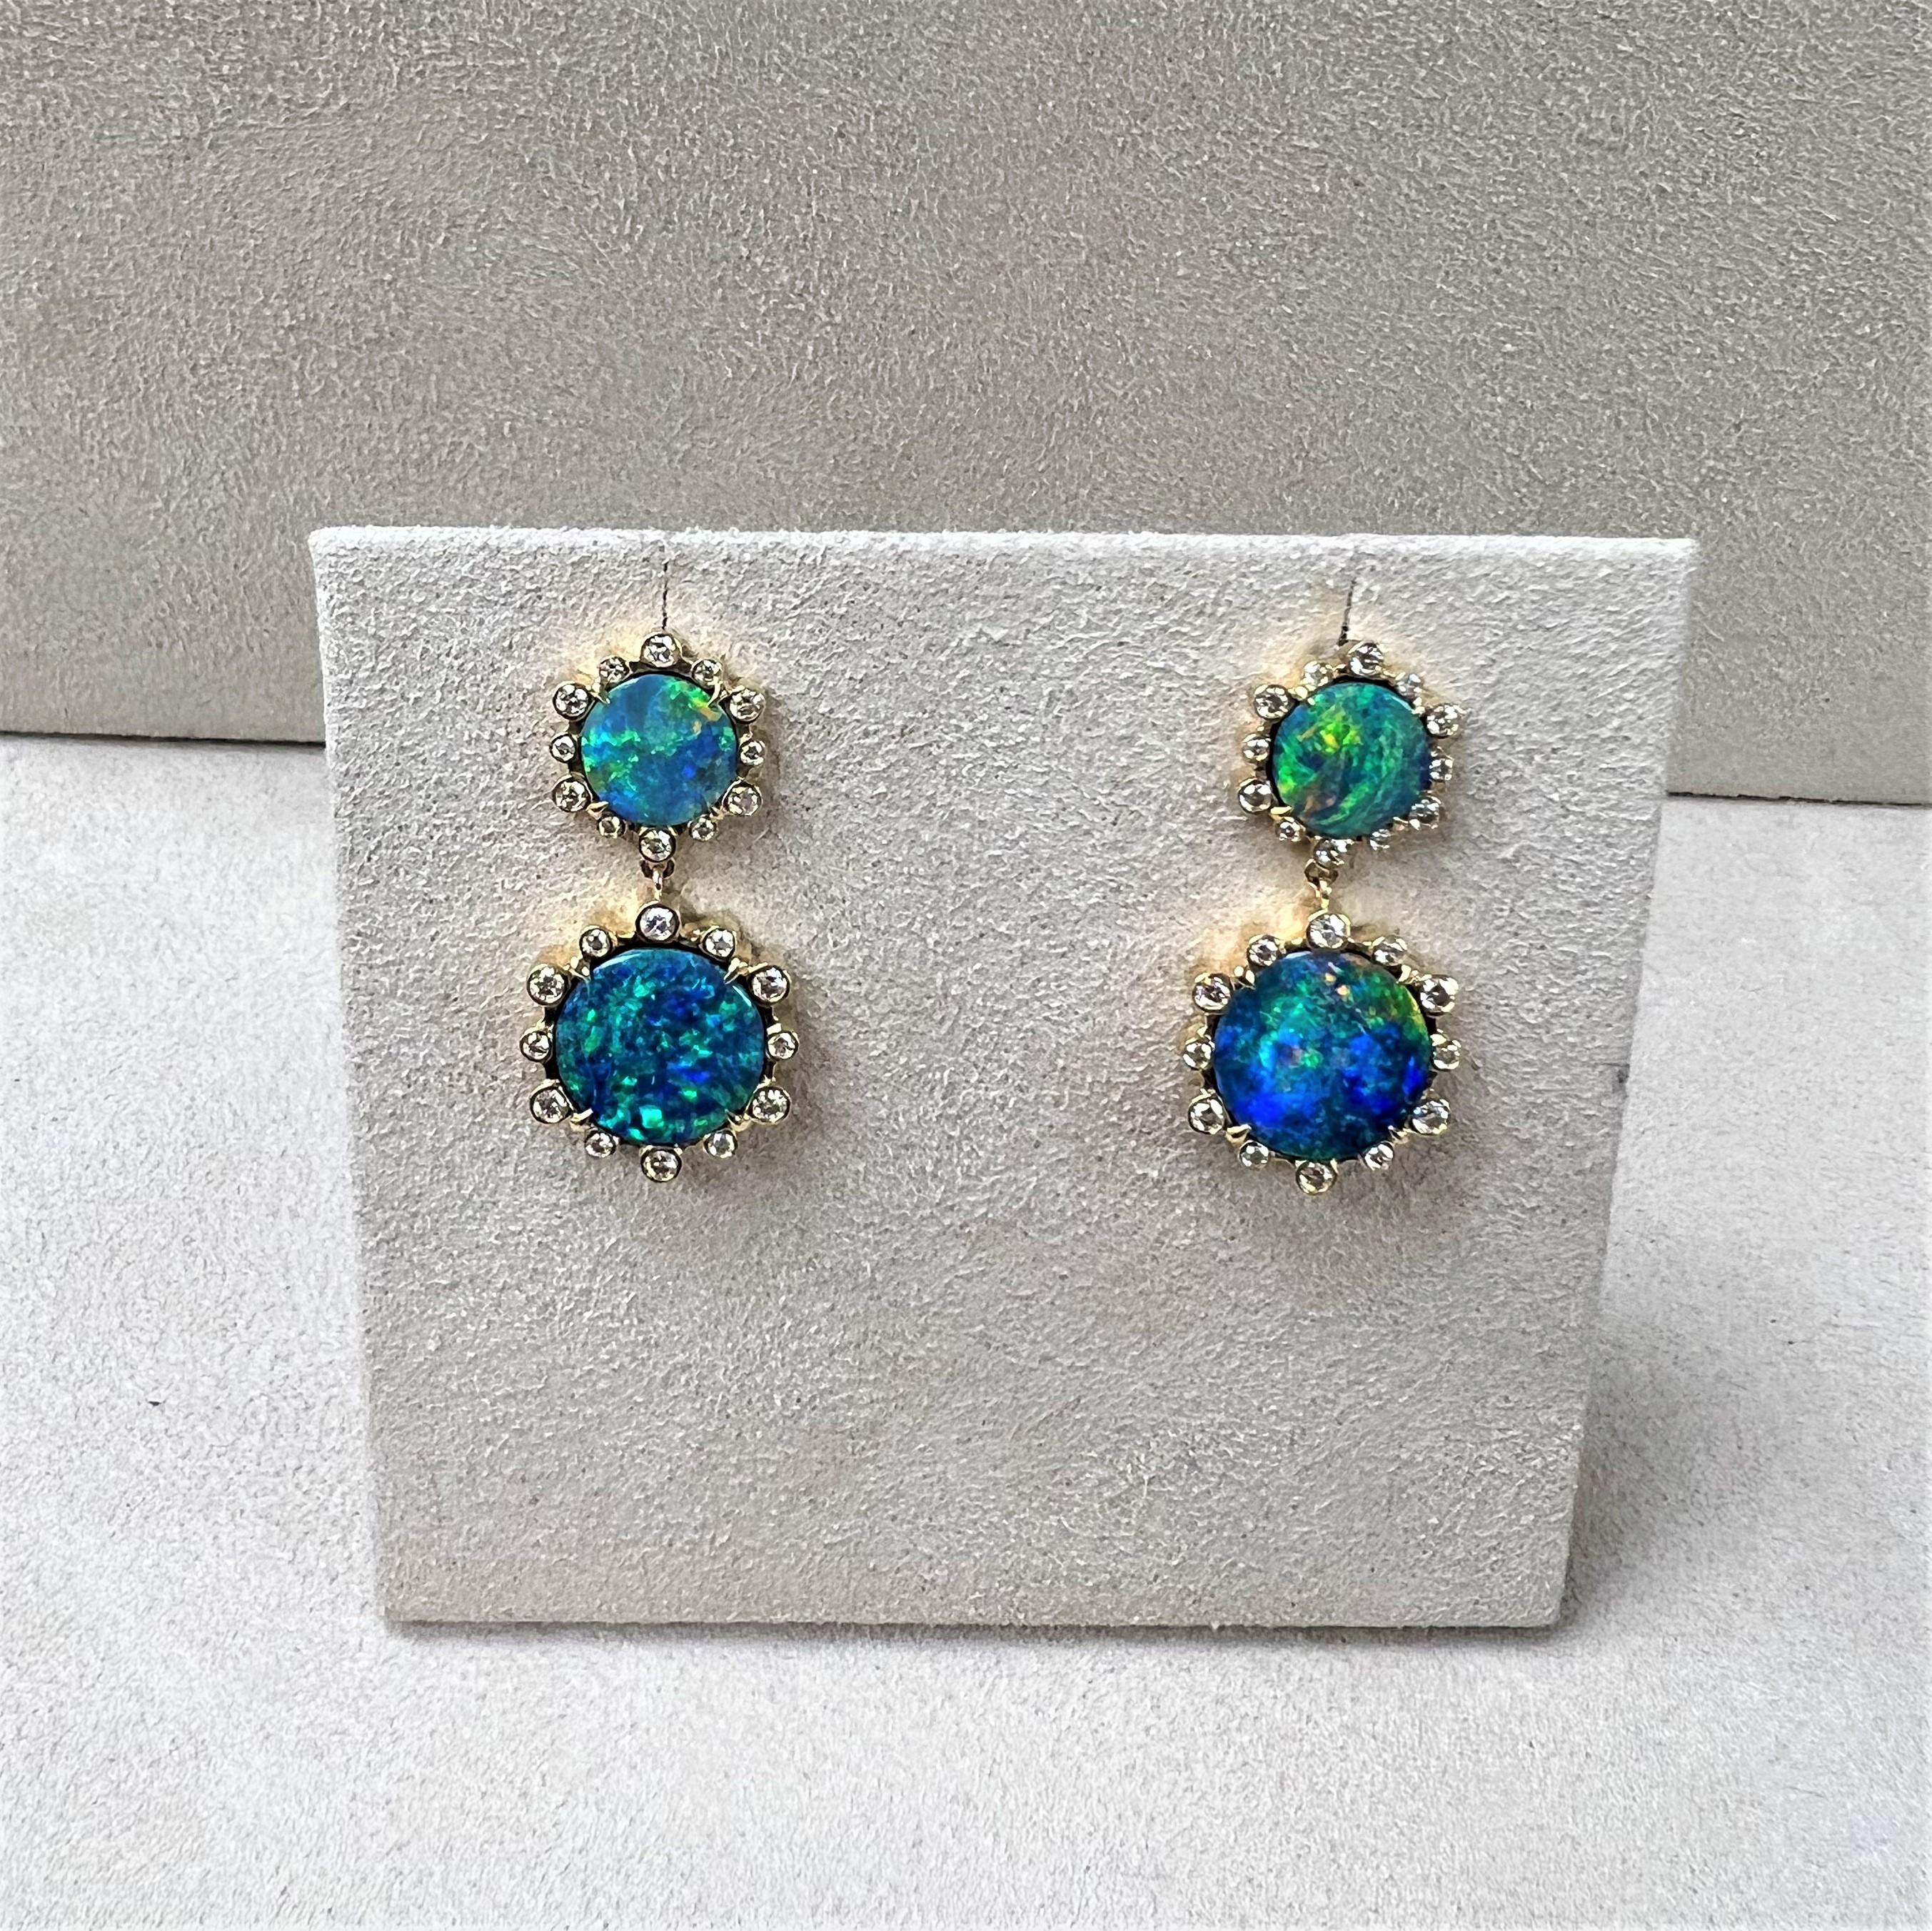 Created in 18 karat yellow gold
Boulder Opal 9.70 carats approx.
Diamonds 0.60 carat approx.
Post back for pierced ears
Limited Edition



About the Designers

Drawing inspiration from little things, Dharmesh & Namrata Kothari have created an